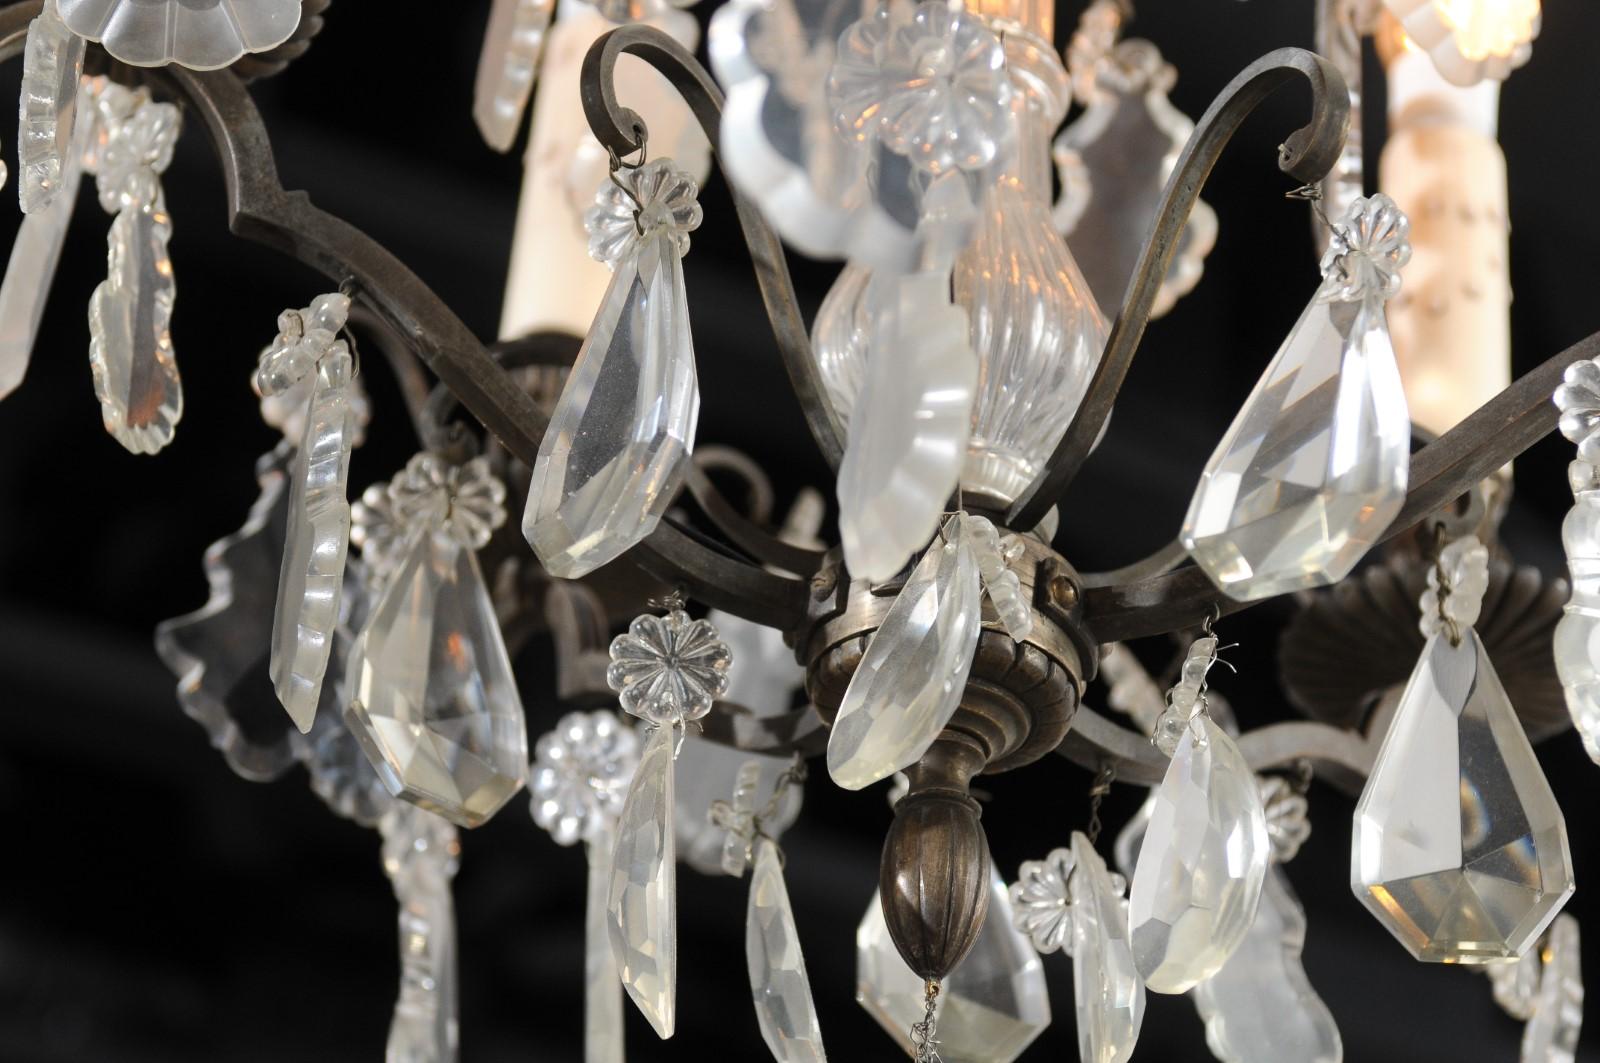 A French five-light iron and crystal chandelier from the 19th century, with pendeloques, rosettes and flower bobeches. Created in France during the 19th century, this chandelier features an iron armature with scrolling accents and central crystal